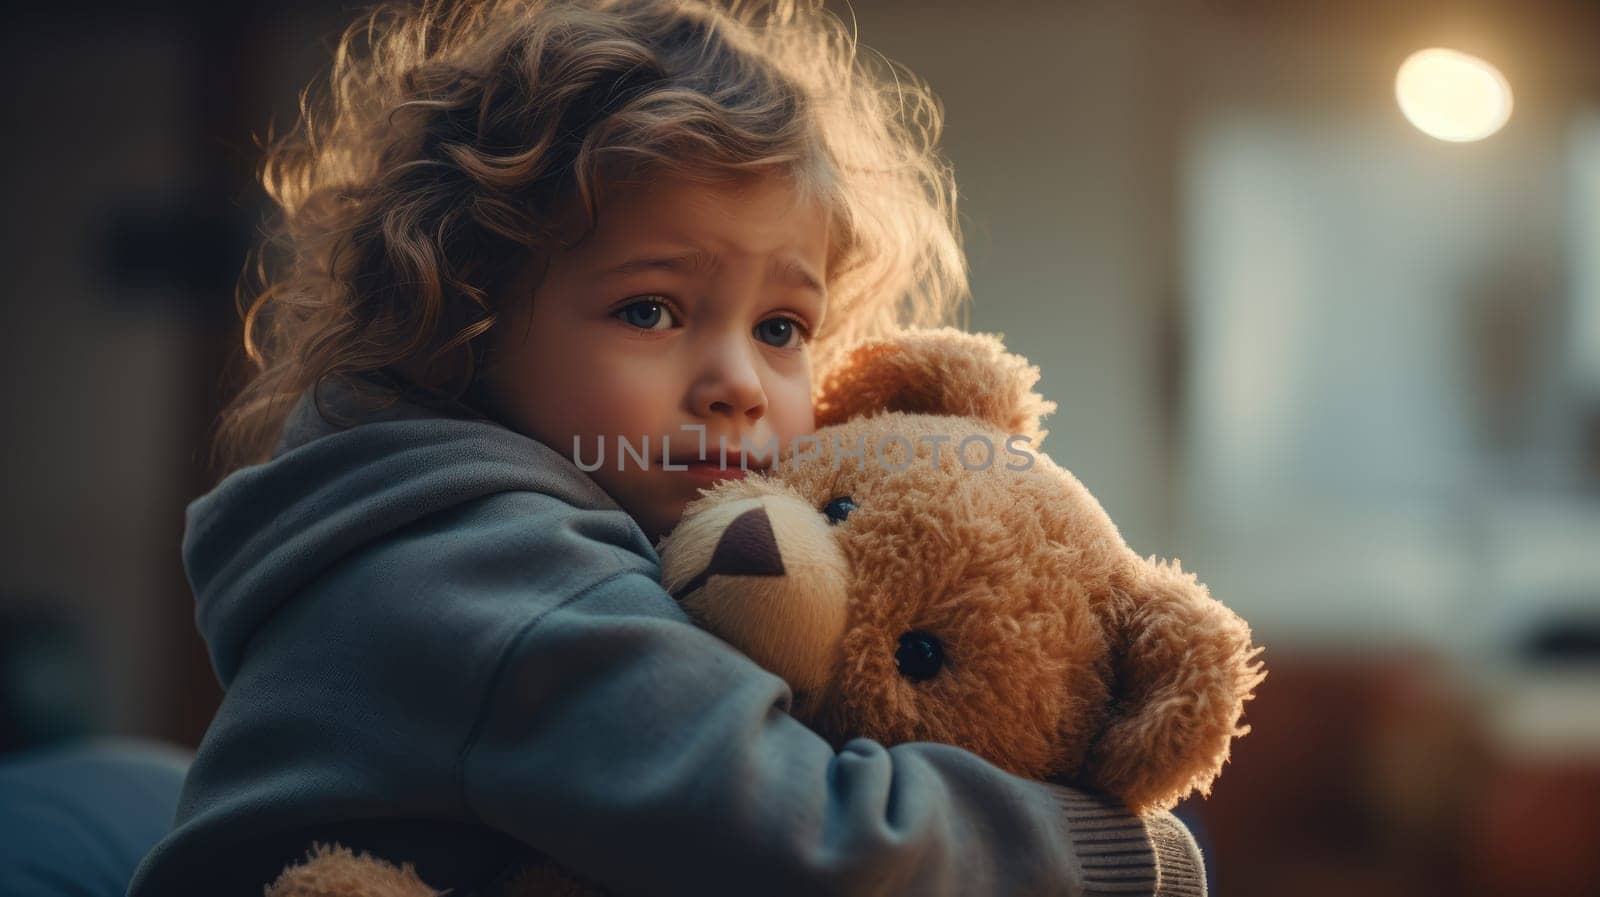 Little lonely girl hugging teddy bear, suffering loneliness, family problems. Sad child hugs a plush toy bear